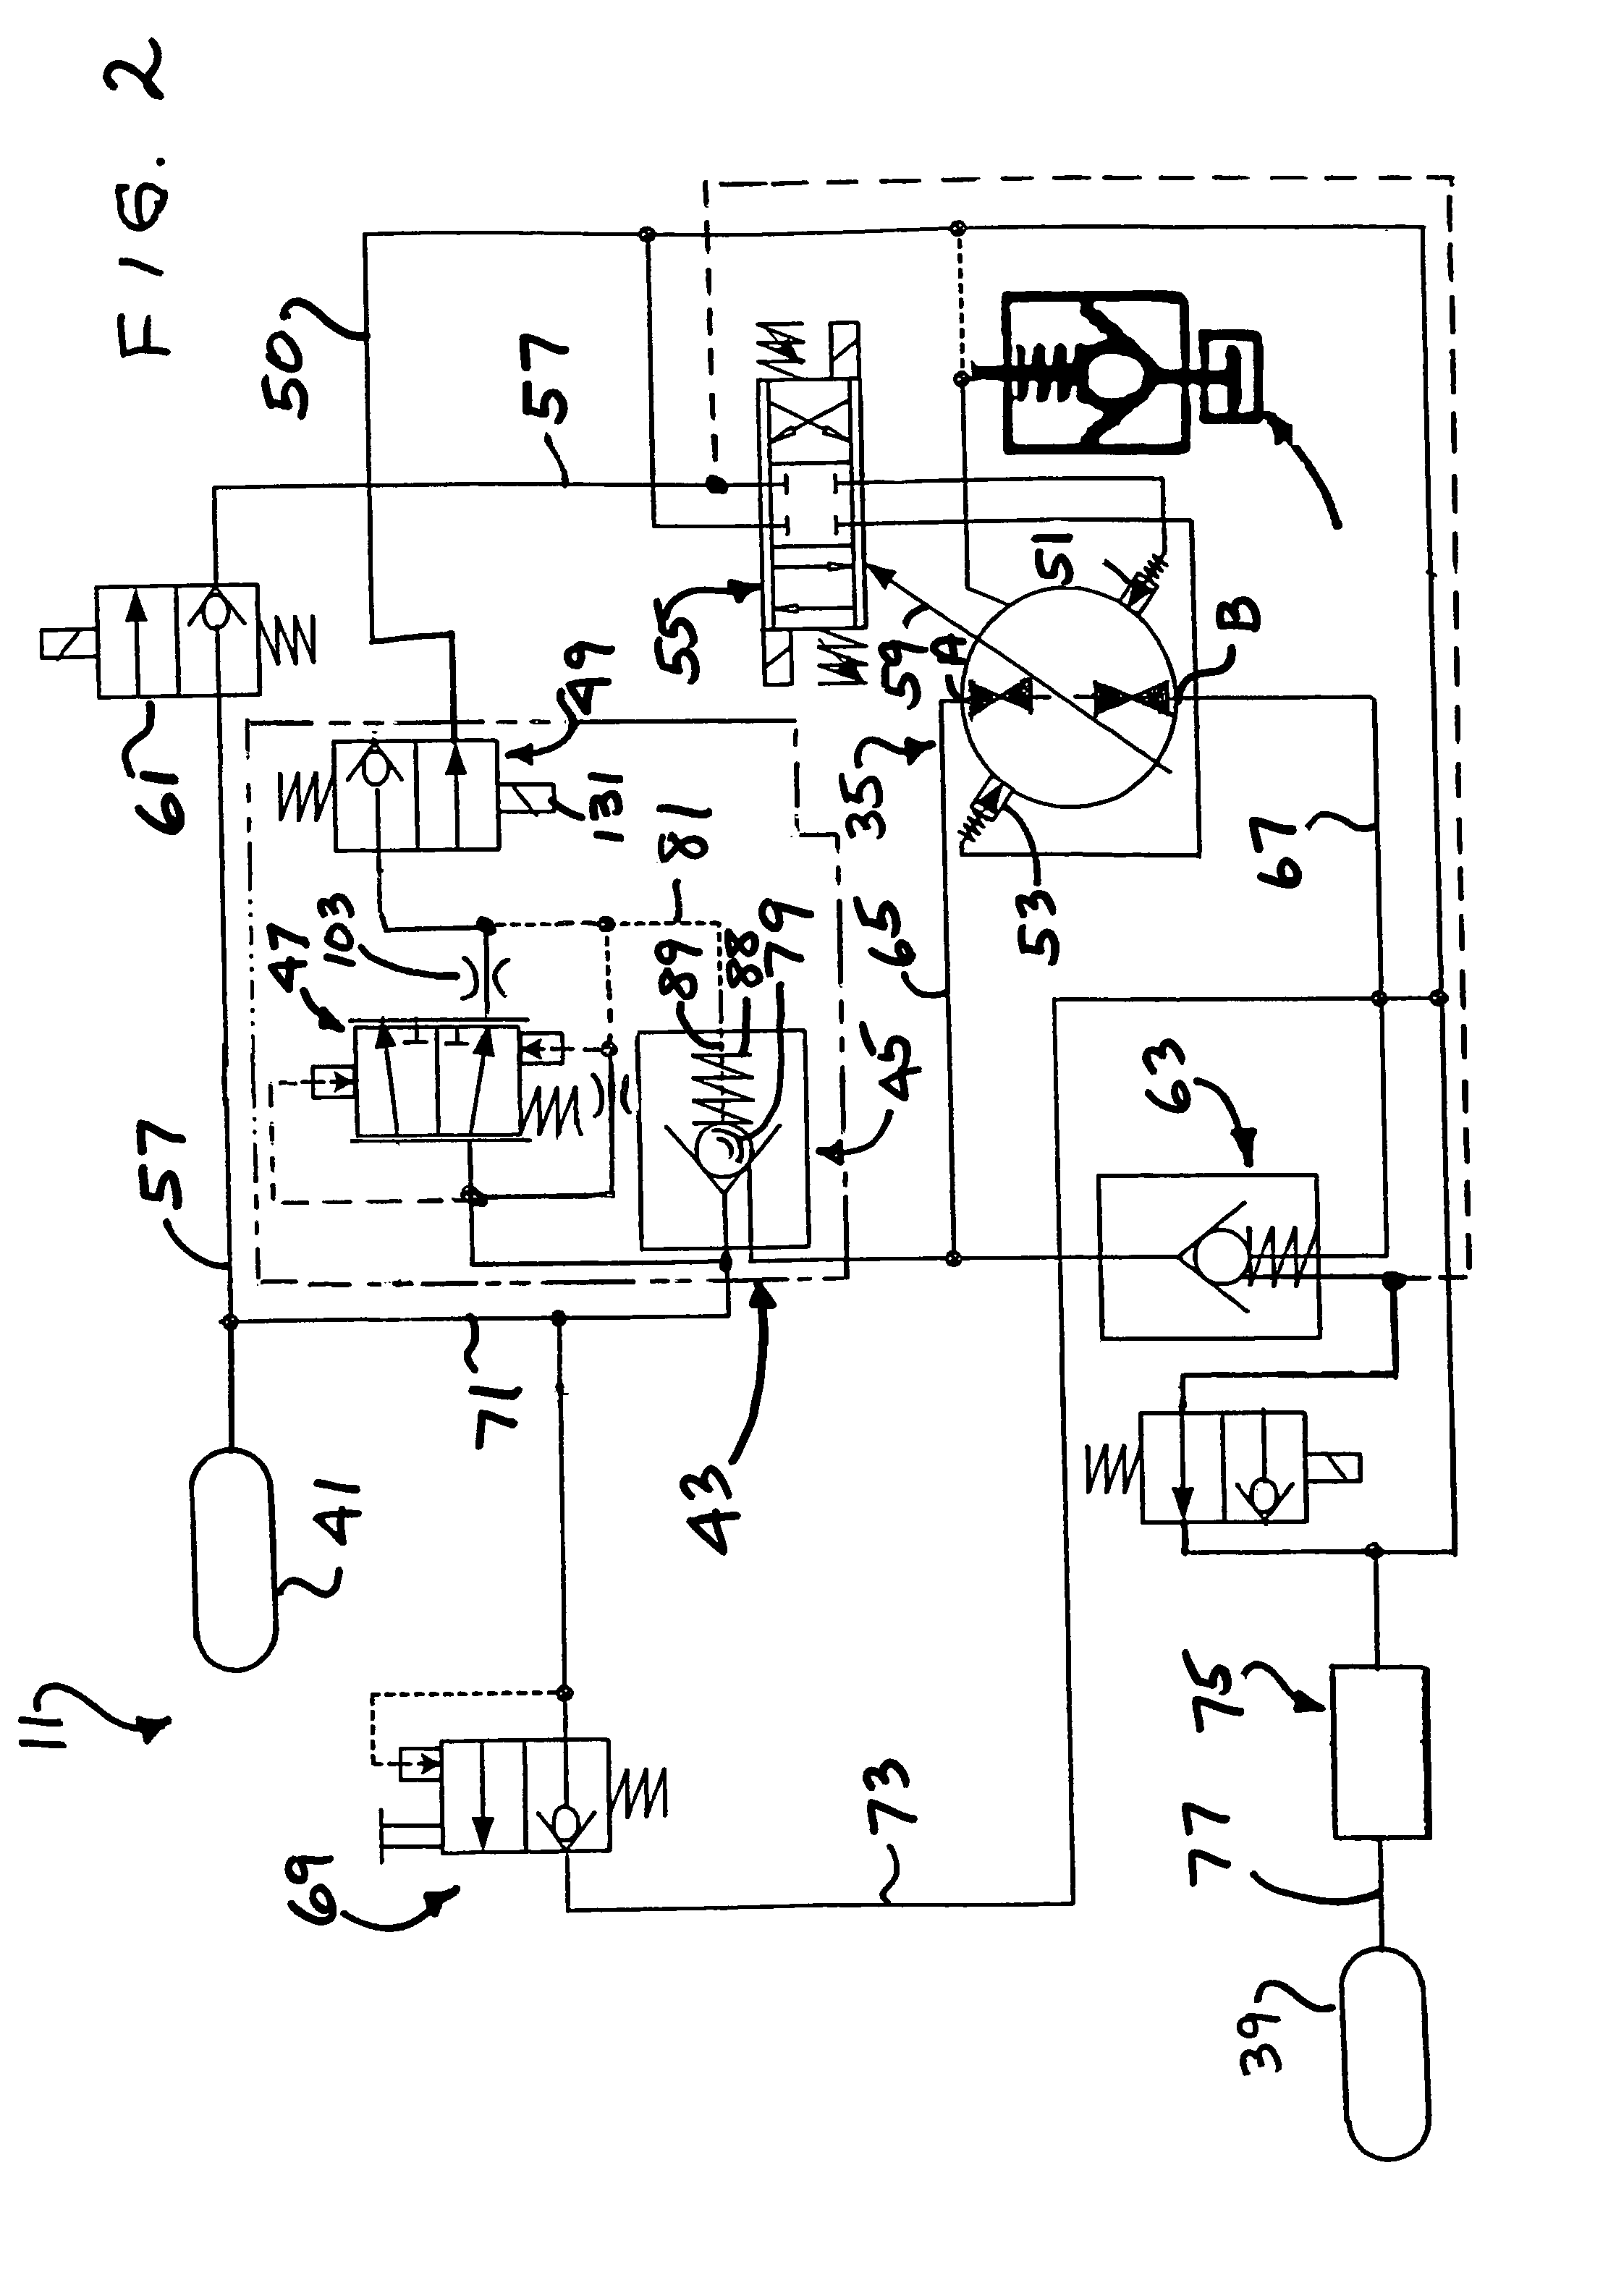 Hydraulic drive system and improved control valve assembly therefor